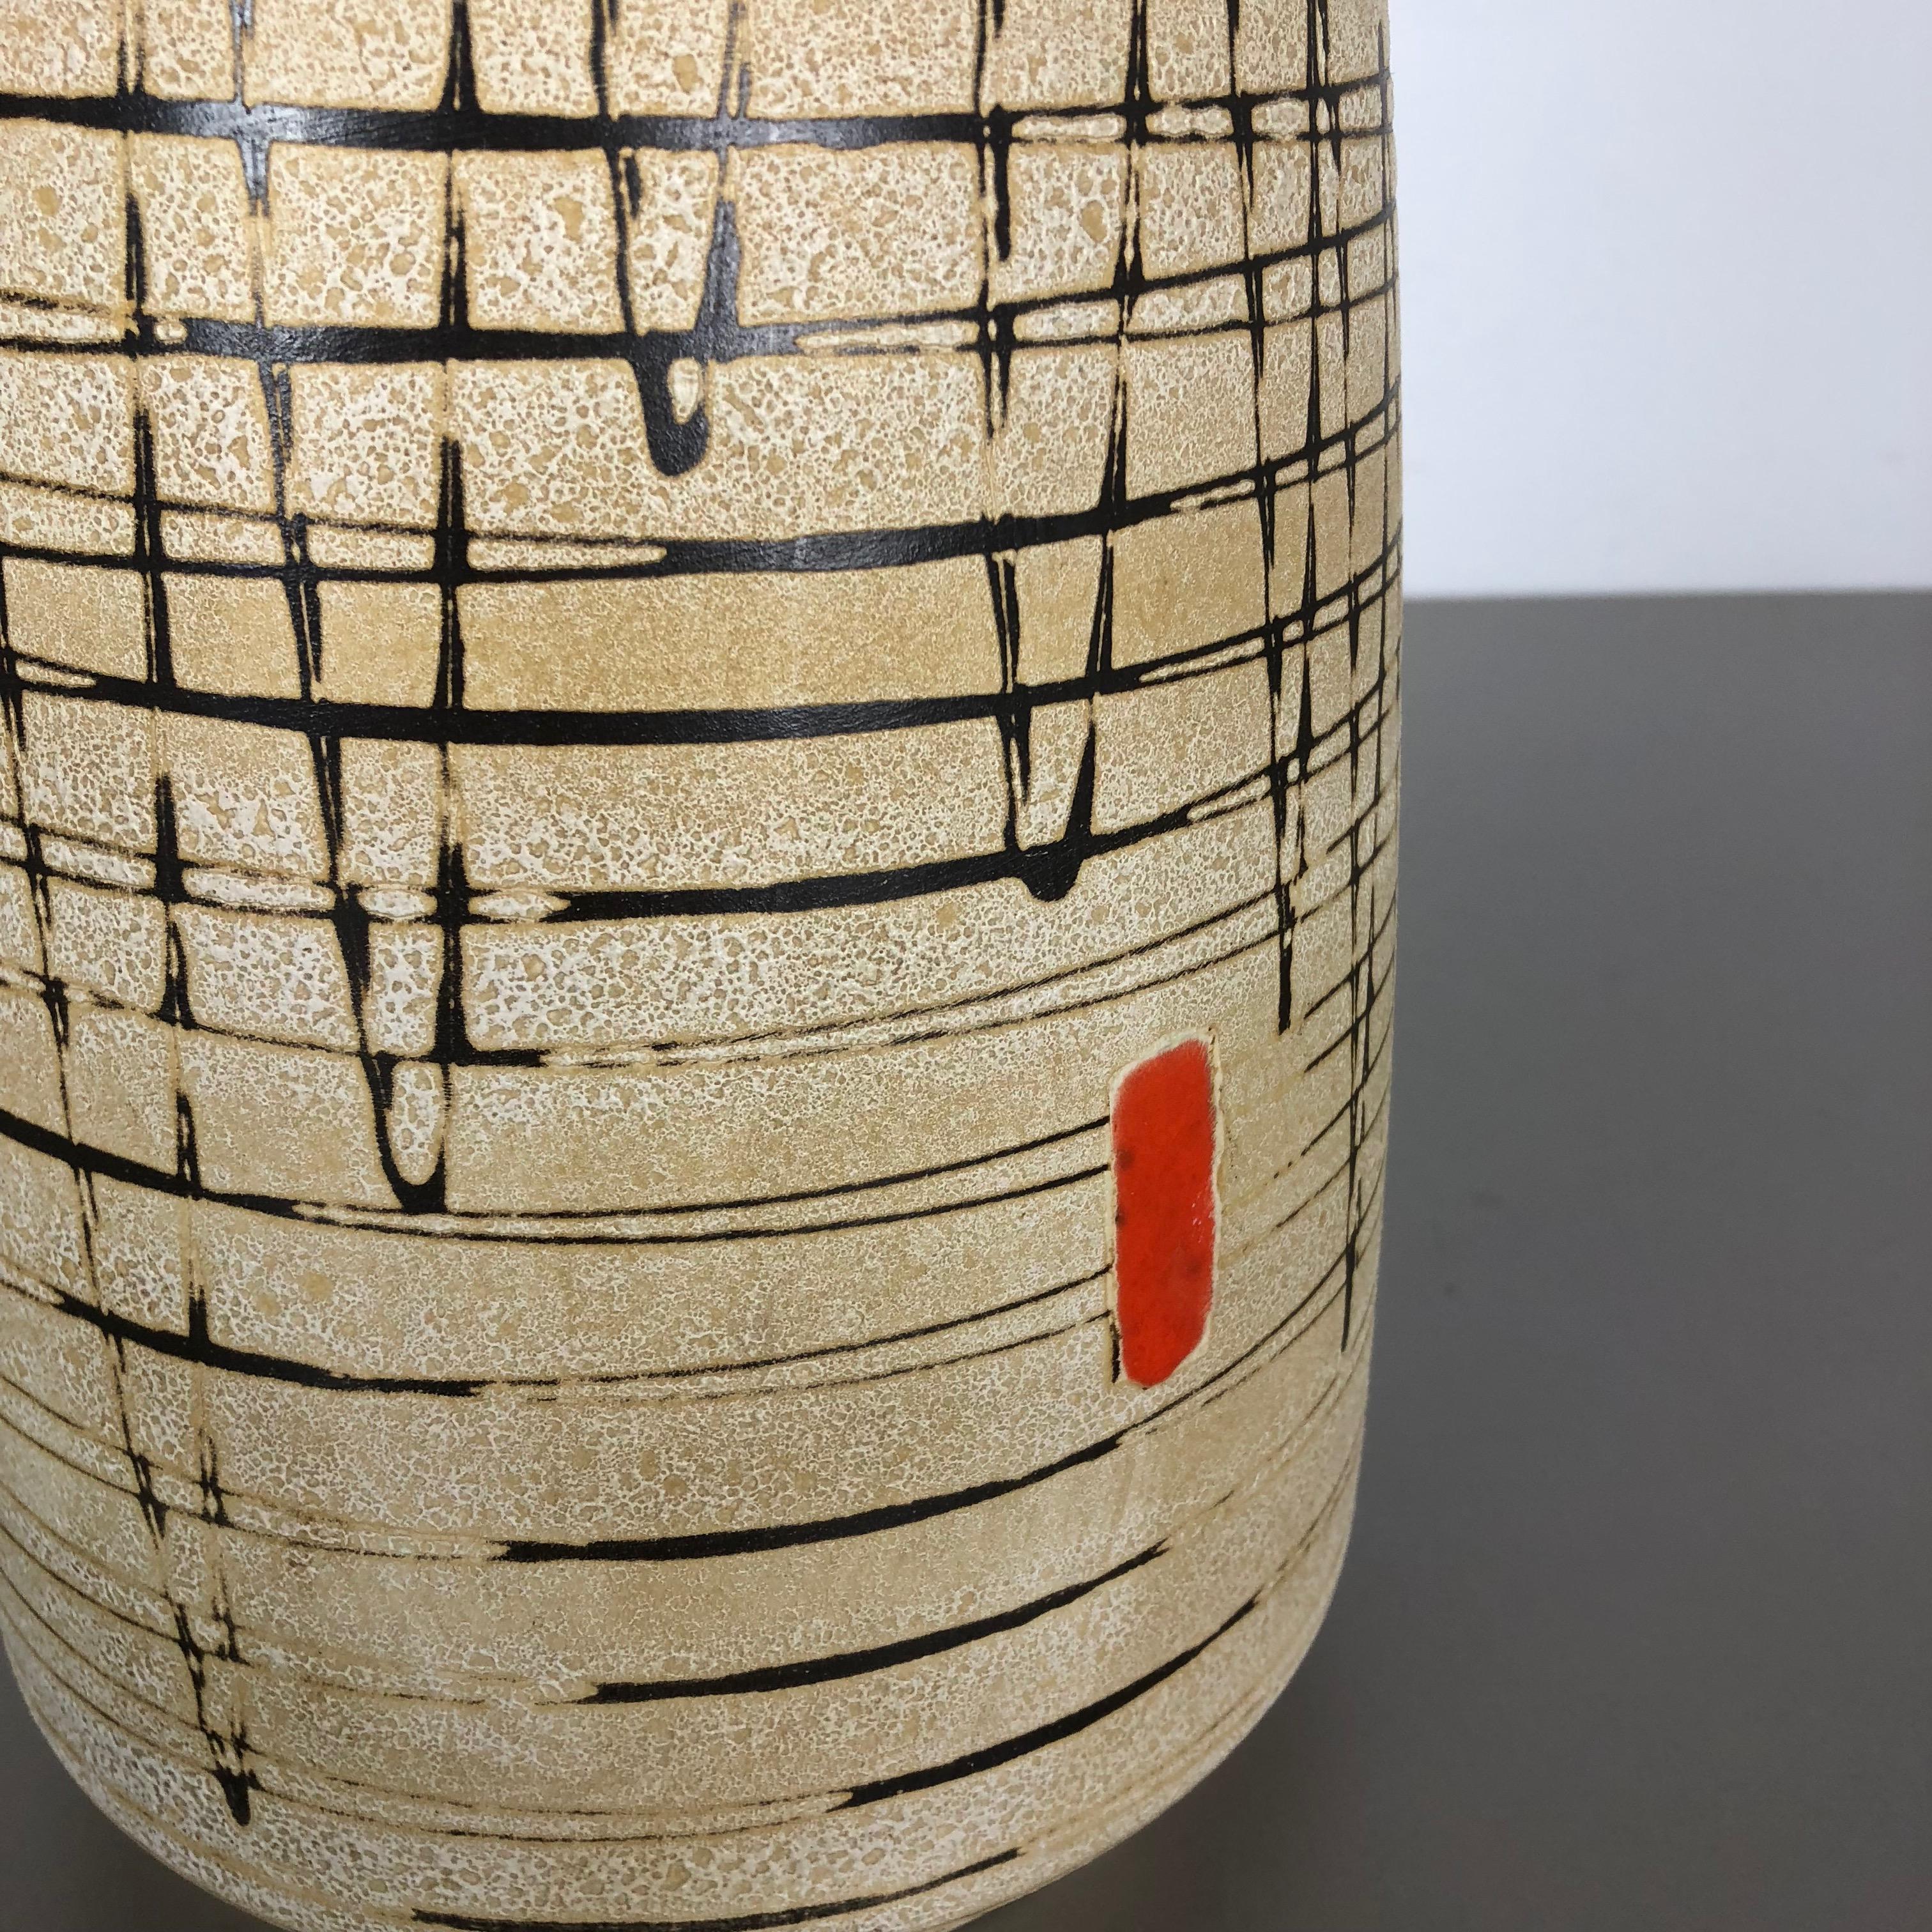 20th Century Large Op Art Abstract Pottery Floor Vase Made by Bay Ceramics, Germany, 1960s For Sale